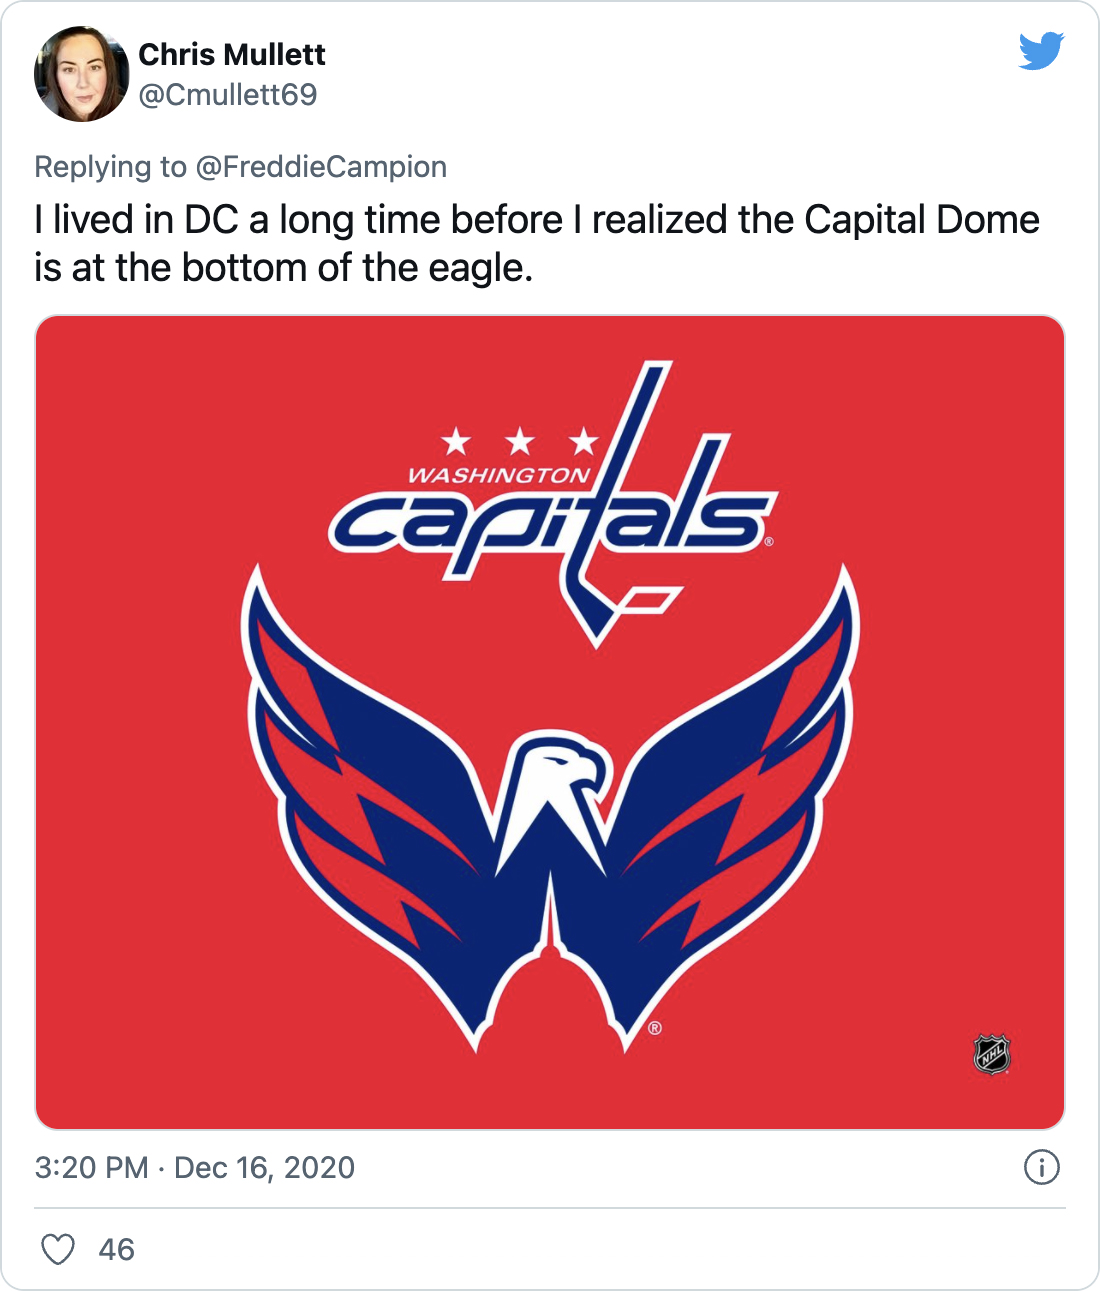 I lived in DC a long time before I realized the Capital Dome is at the bottom of the eagle. - @Cmullett69